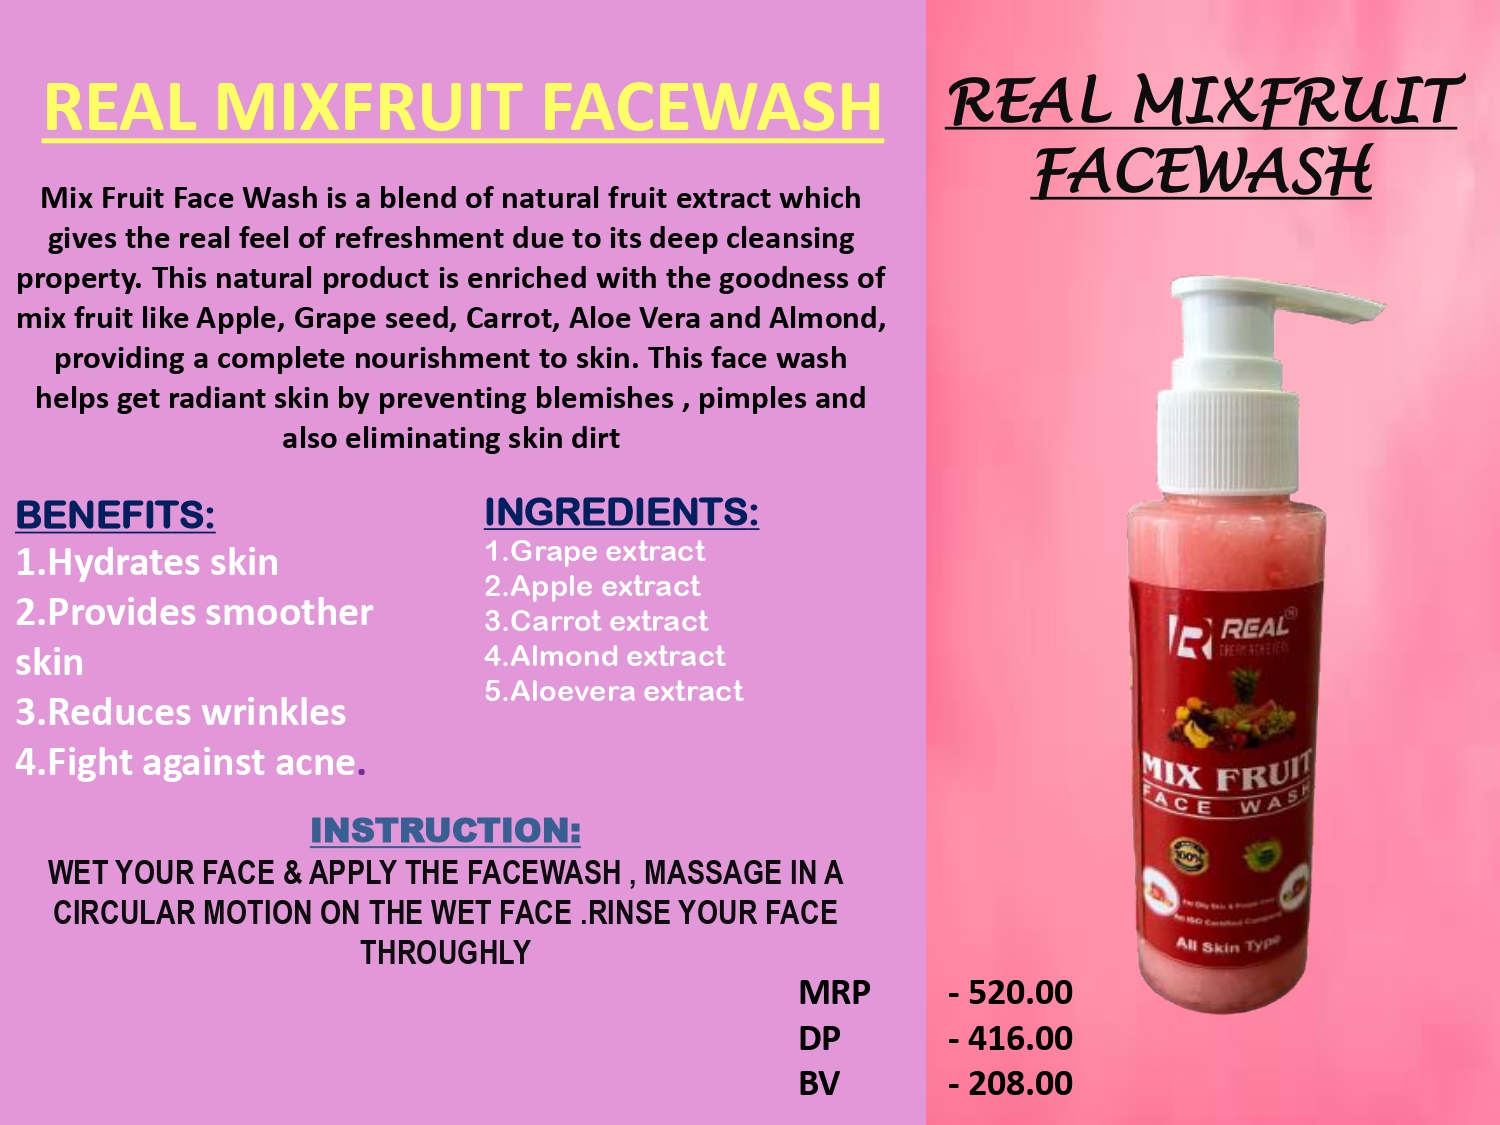 Real Mix Fruit Face Wash